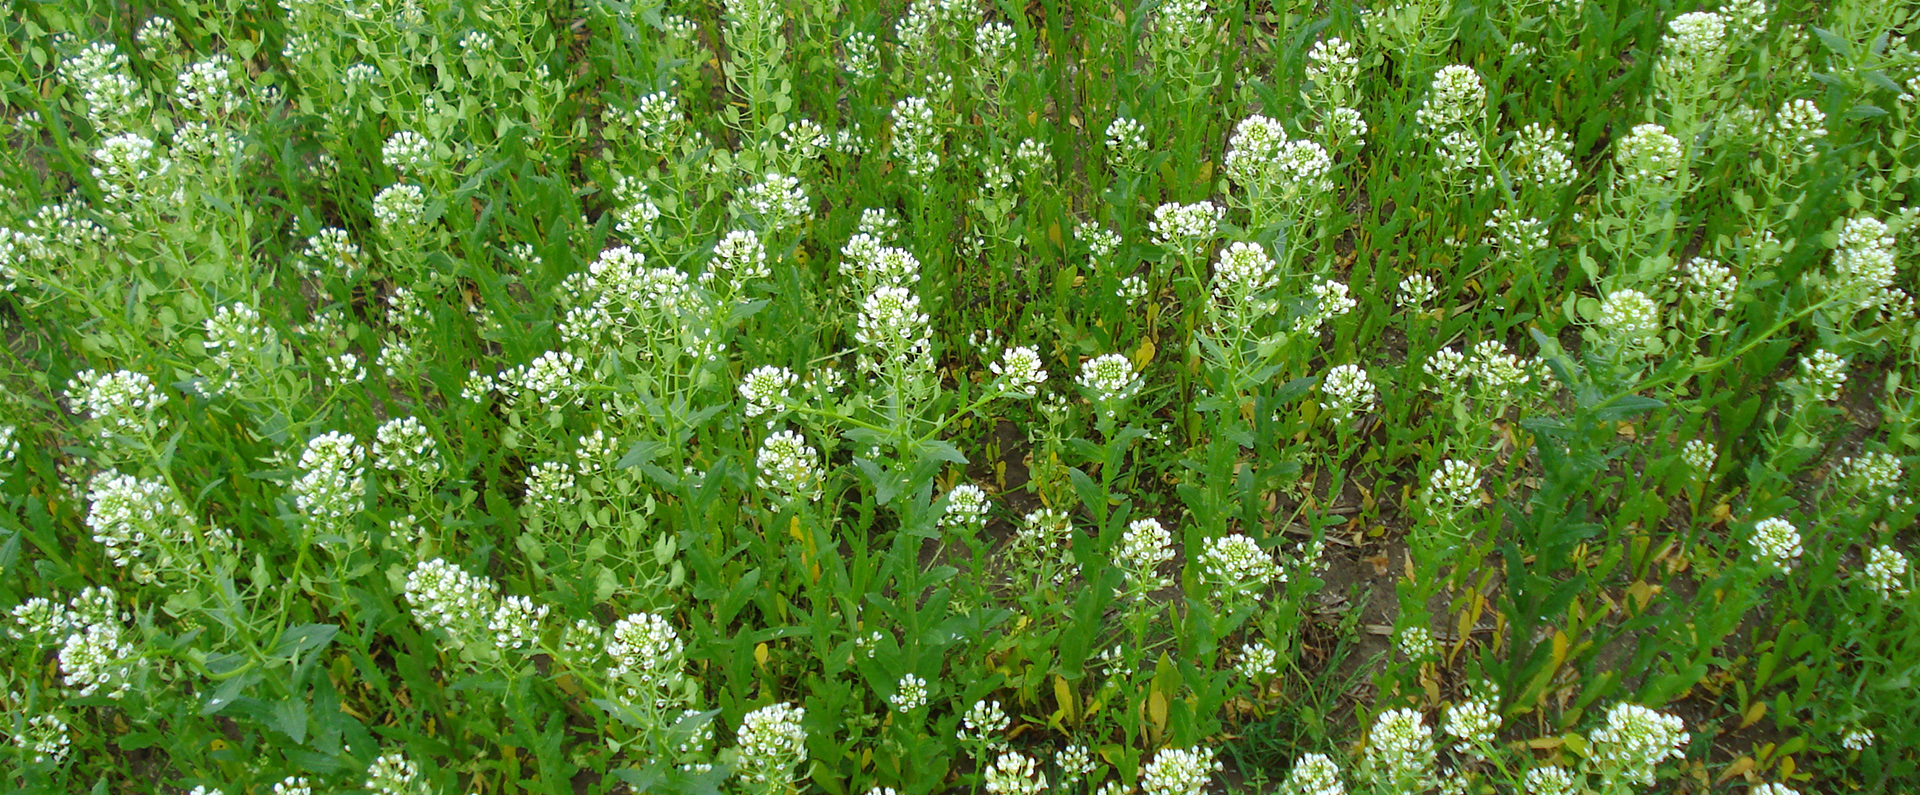 A field of pennycress